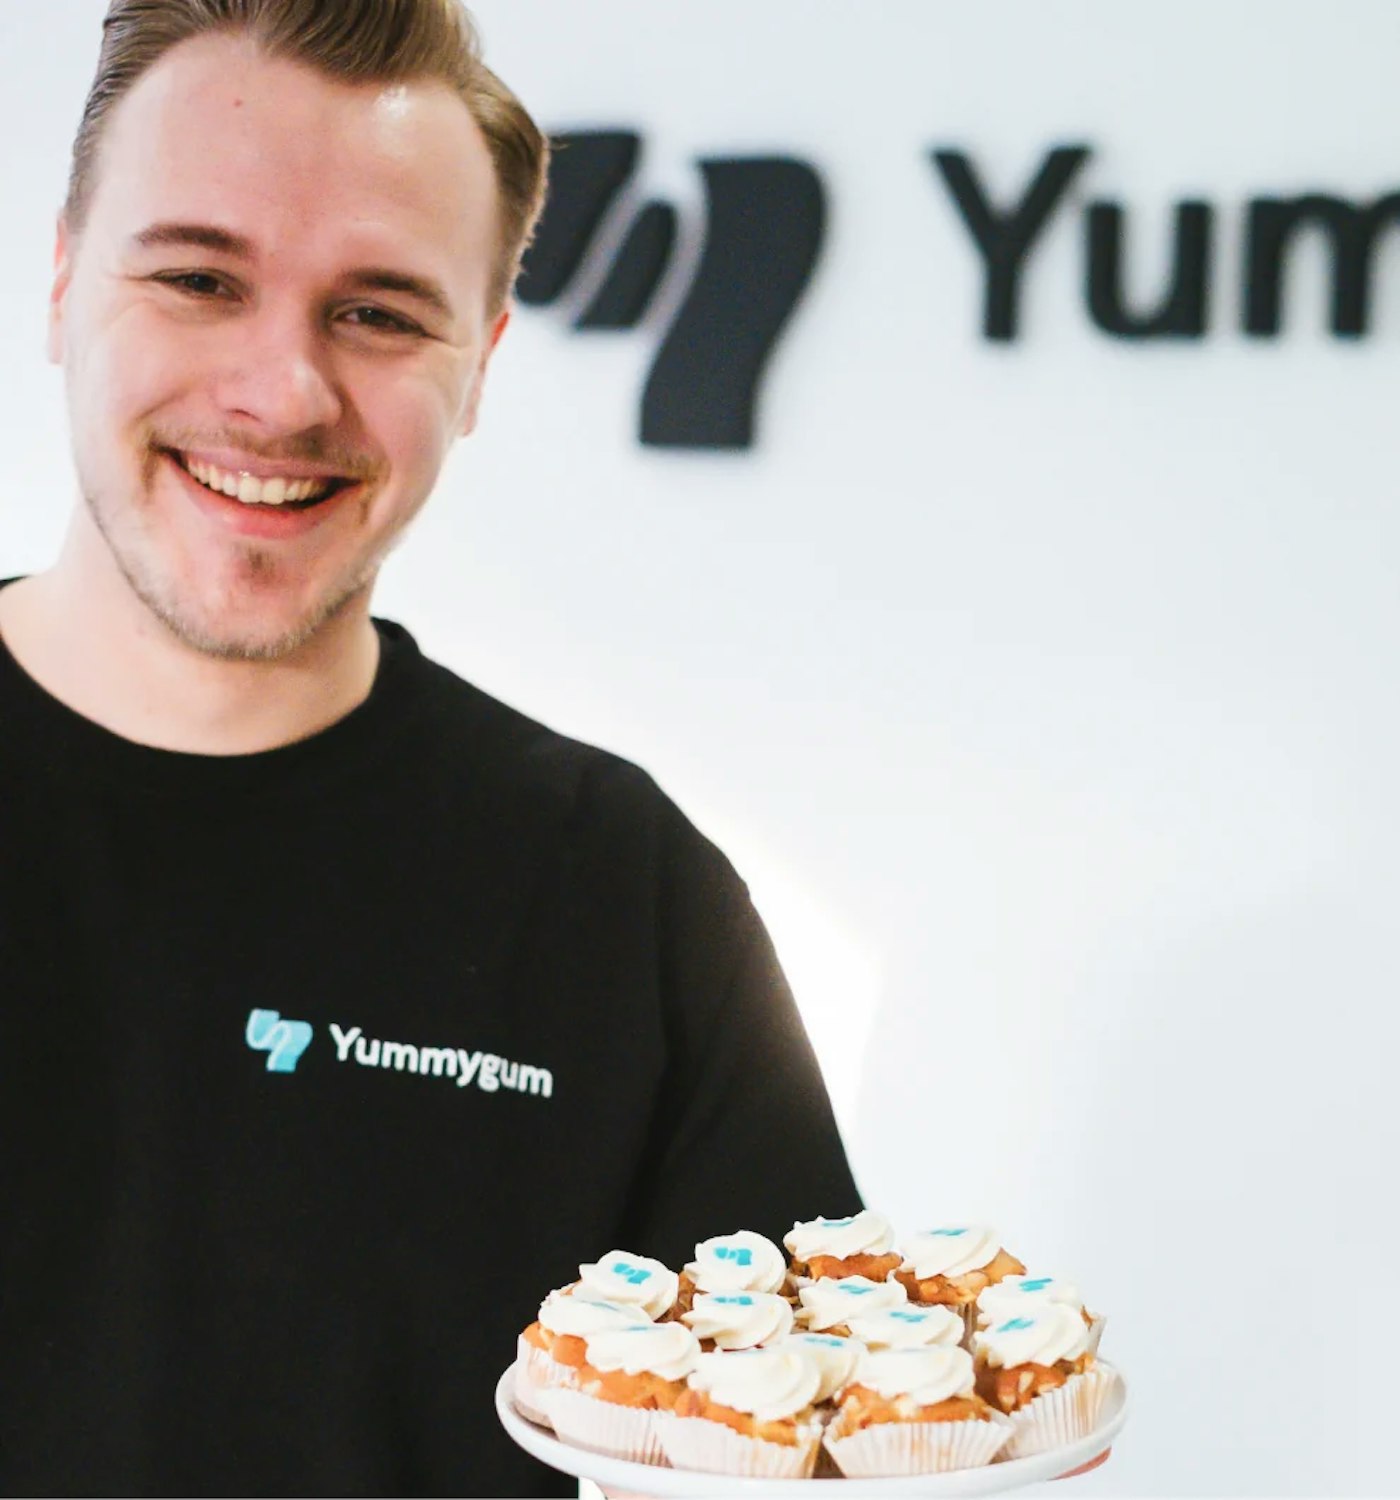 Person smiling at camera holding a plate with small cupcakes that each have a turquoise Yummygum logo mark on top. Person is wearing a near black sweater that shows the same logo mark accompanied by the word Yummygum shown in white. In the back is a white wall that shows a small part of a dark logo.